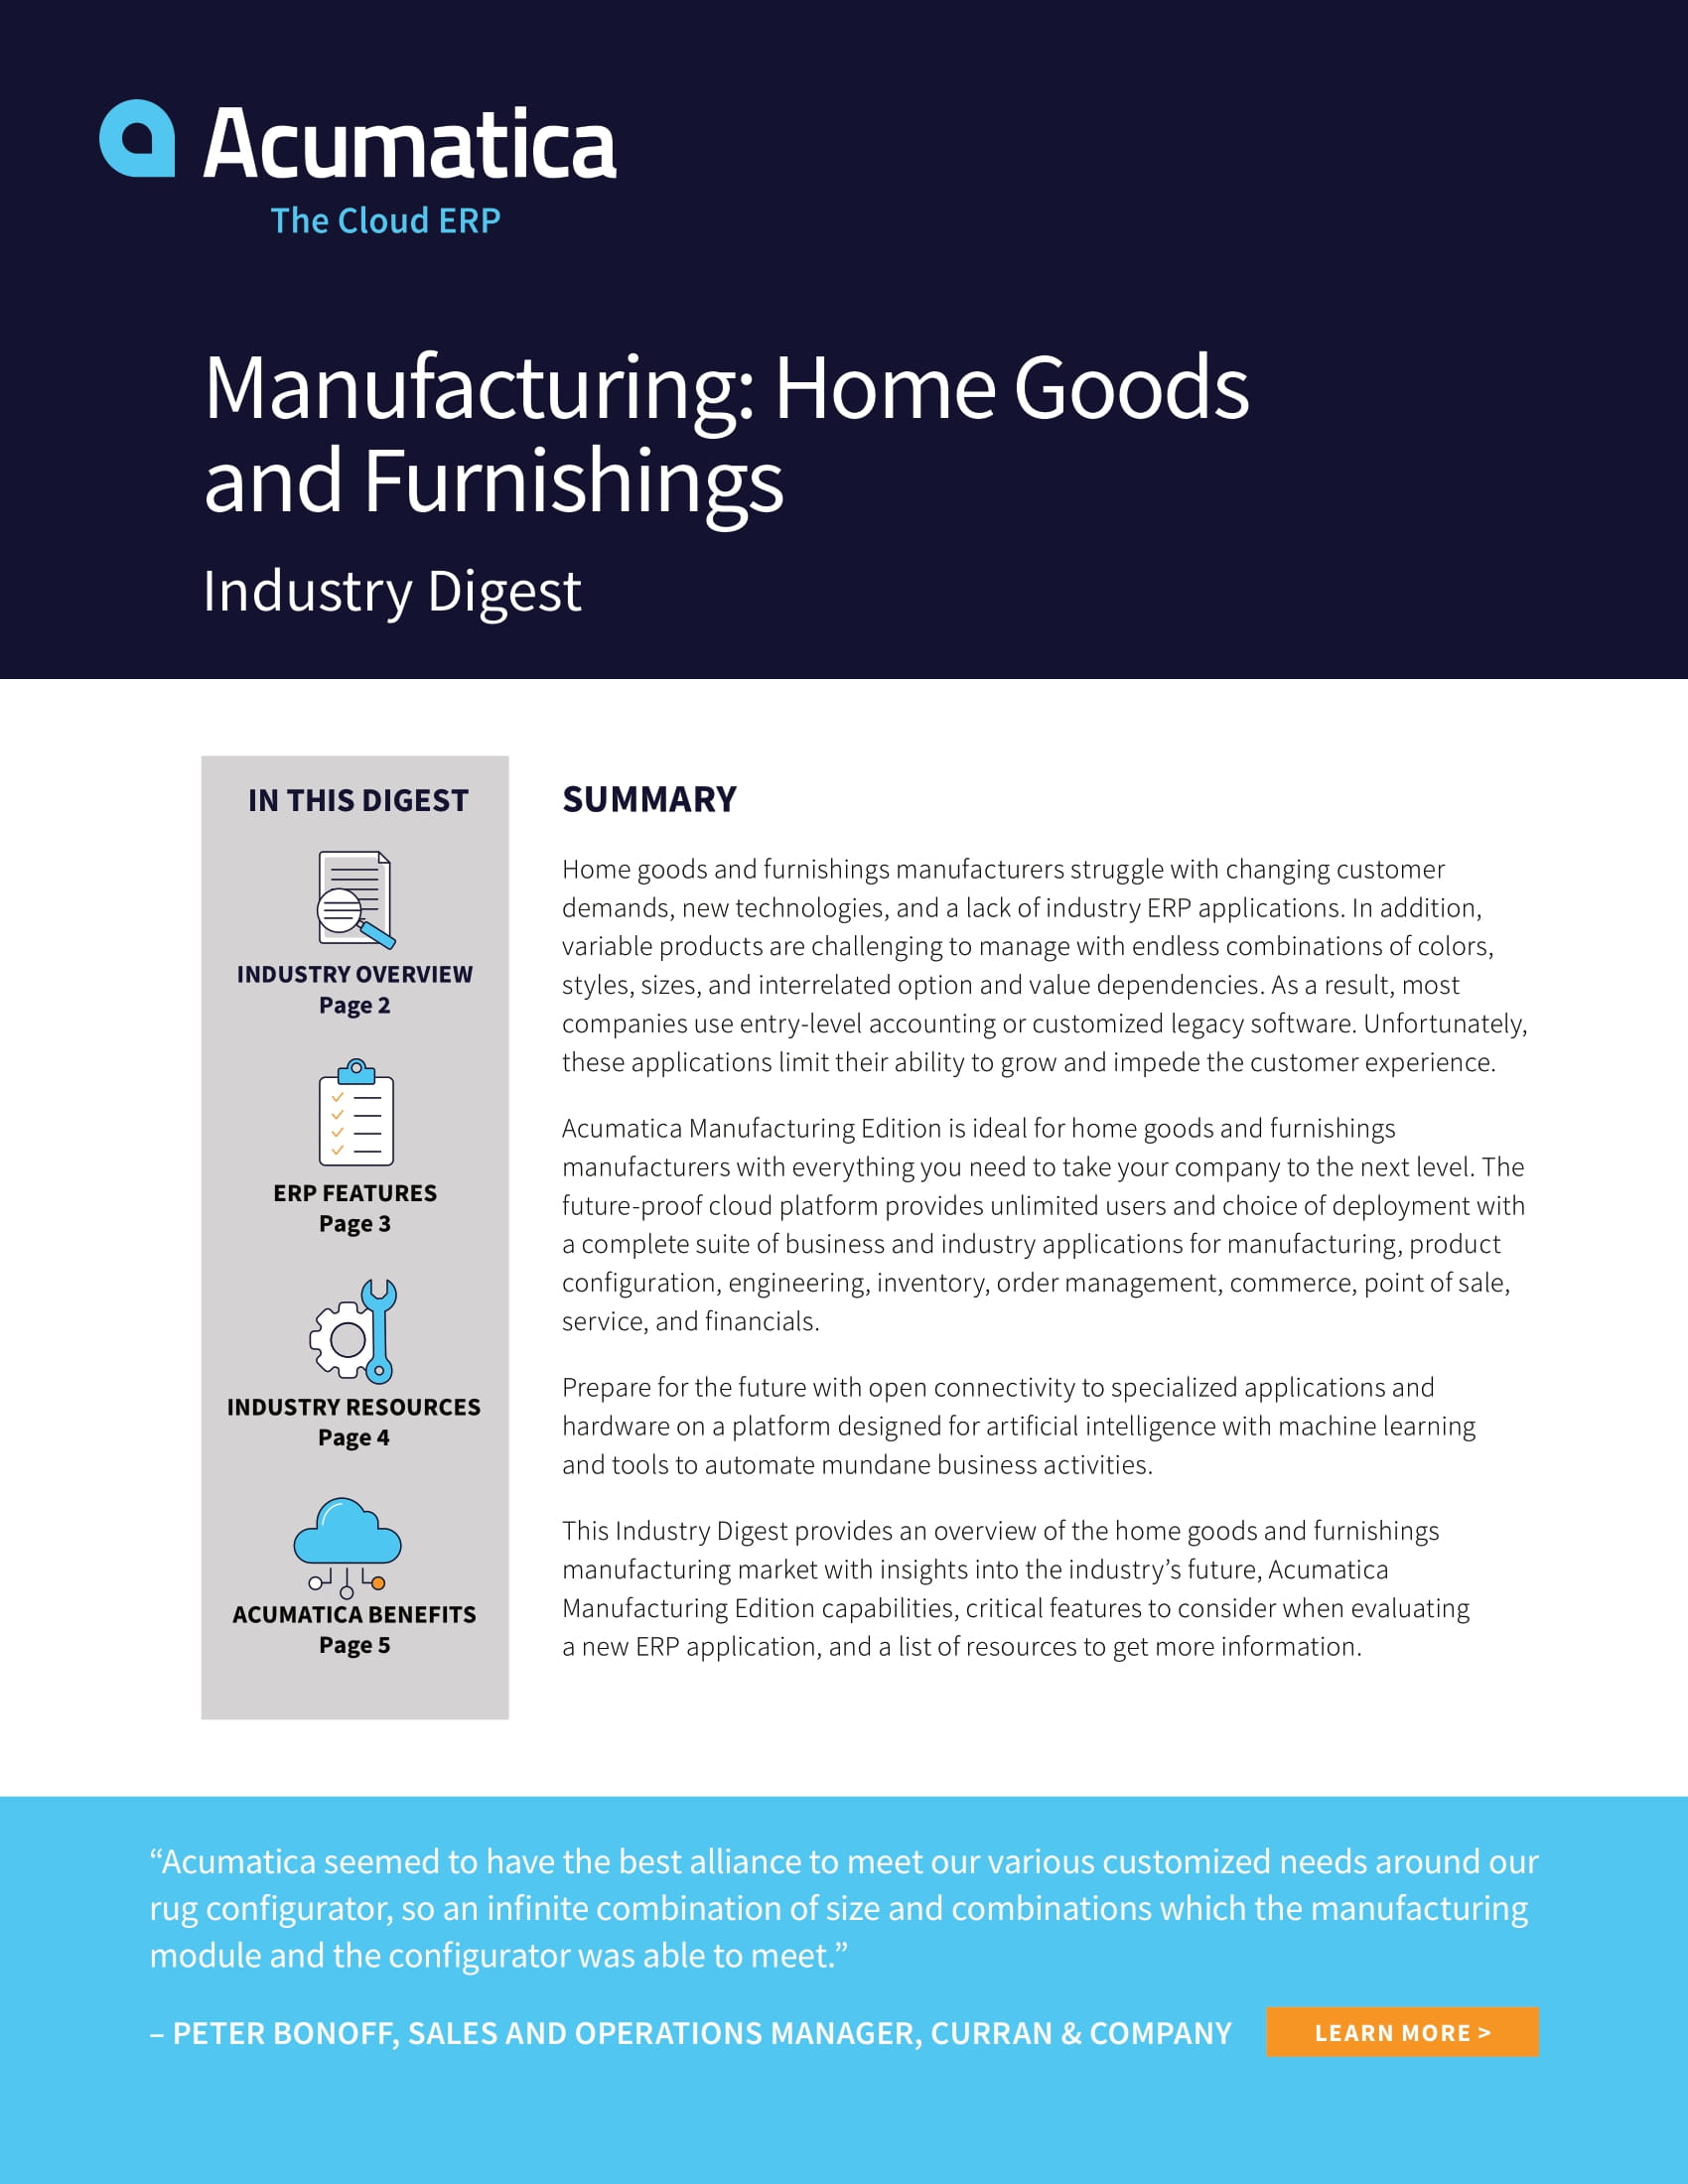 How Home Goods and Furnishings Manufacturers Thrive with Industry-Specific ERP Software